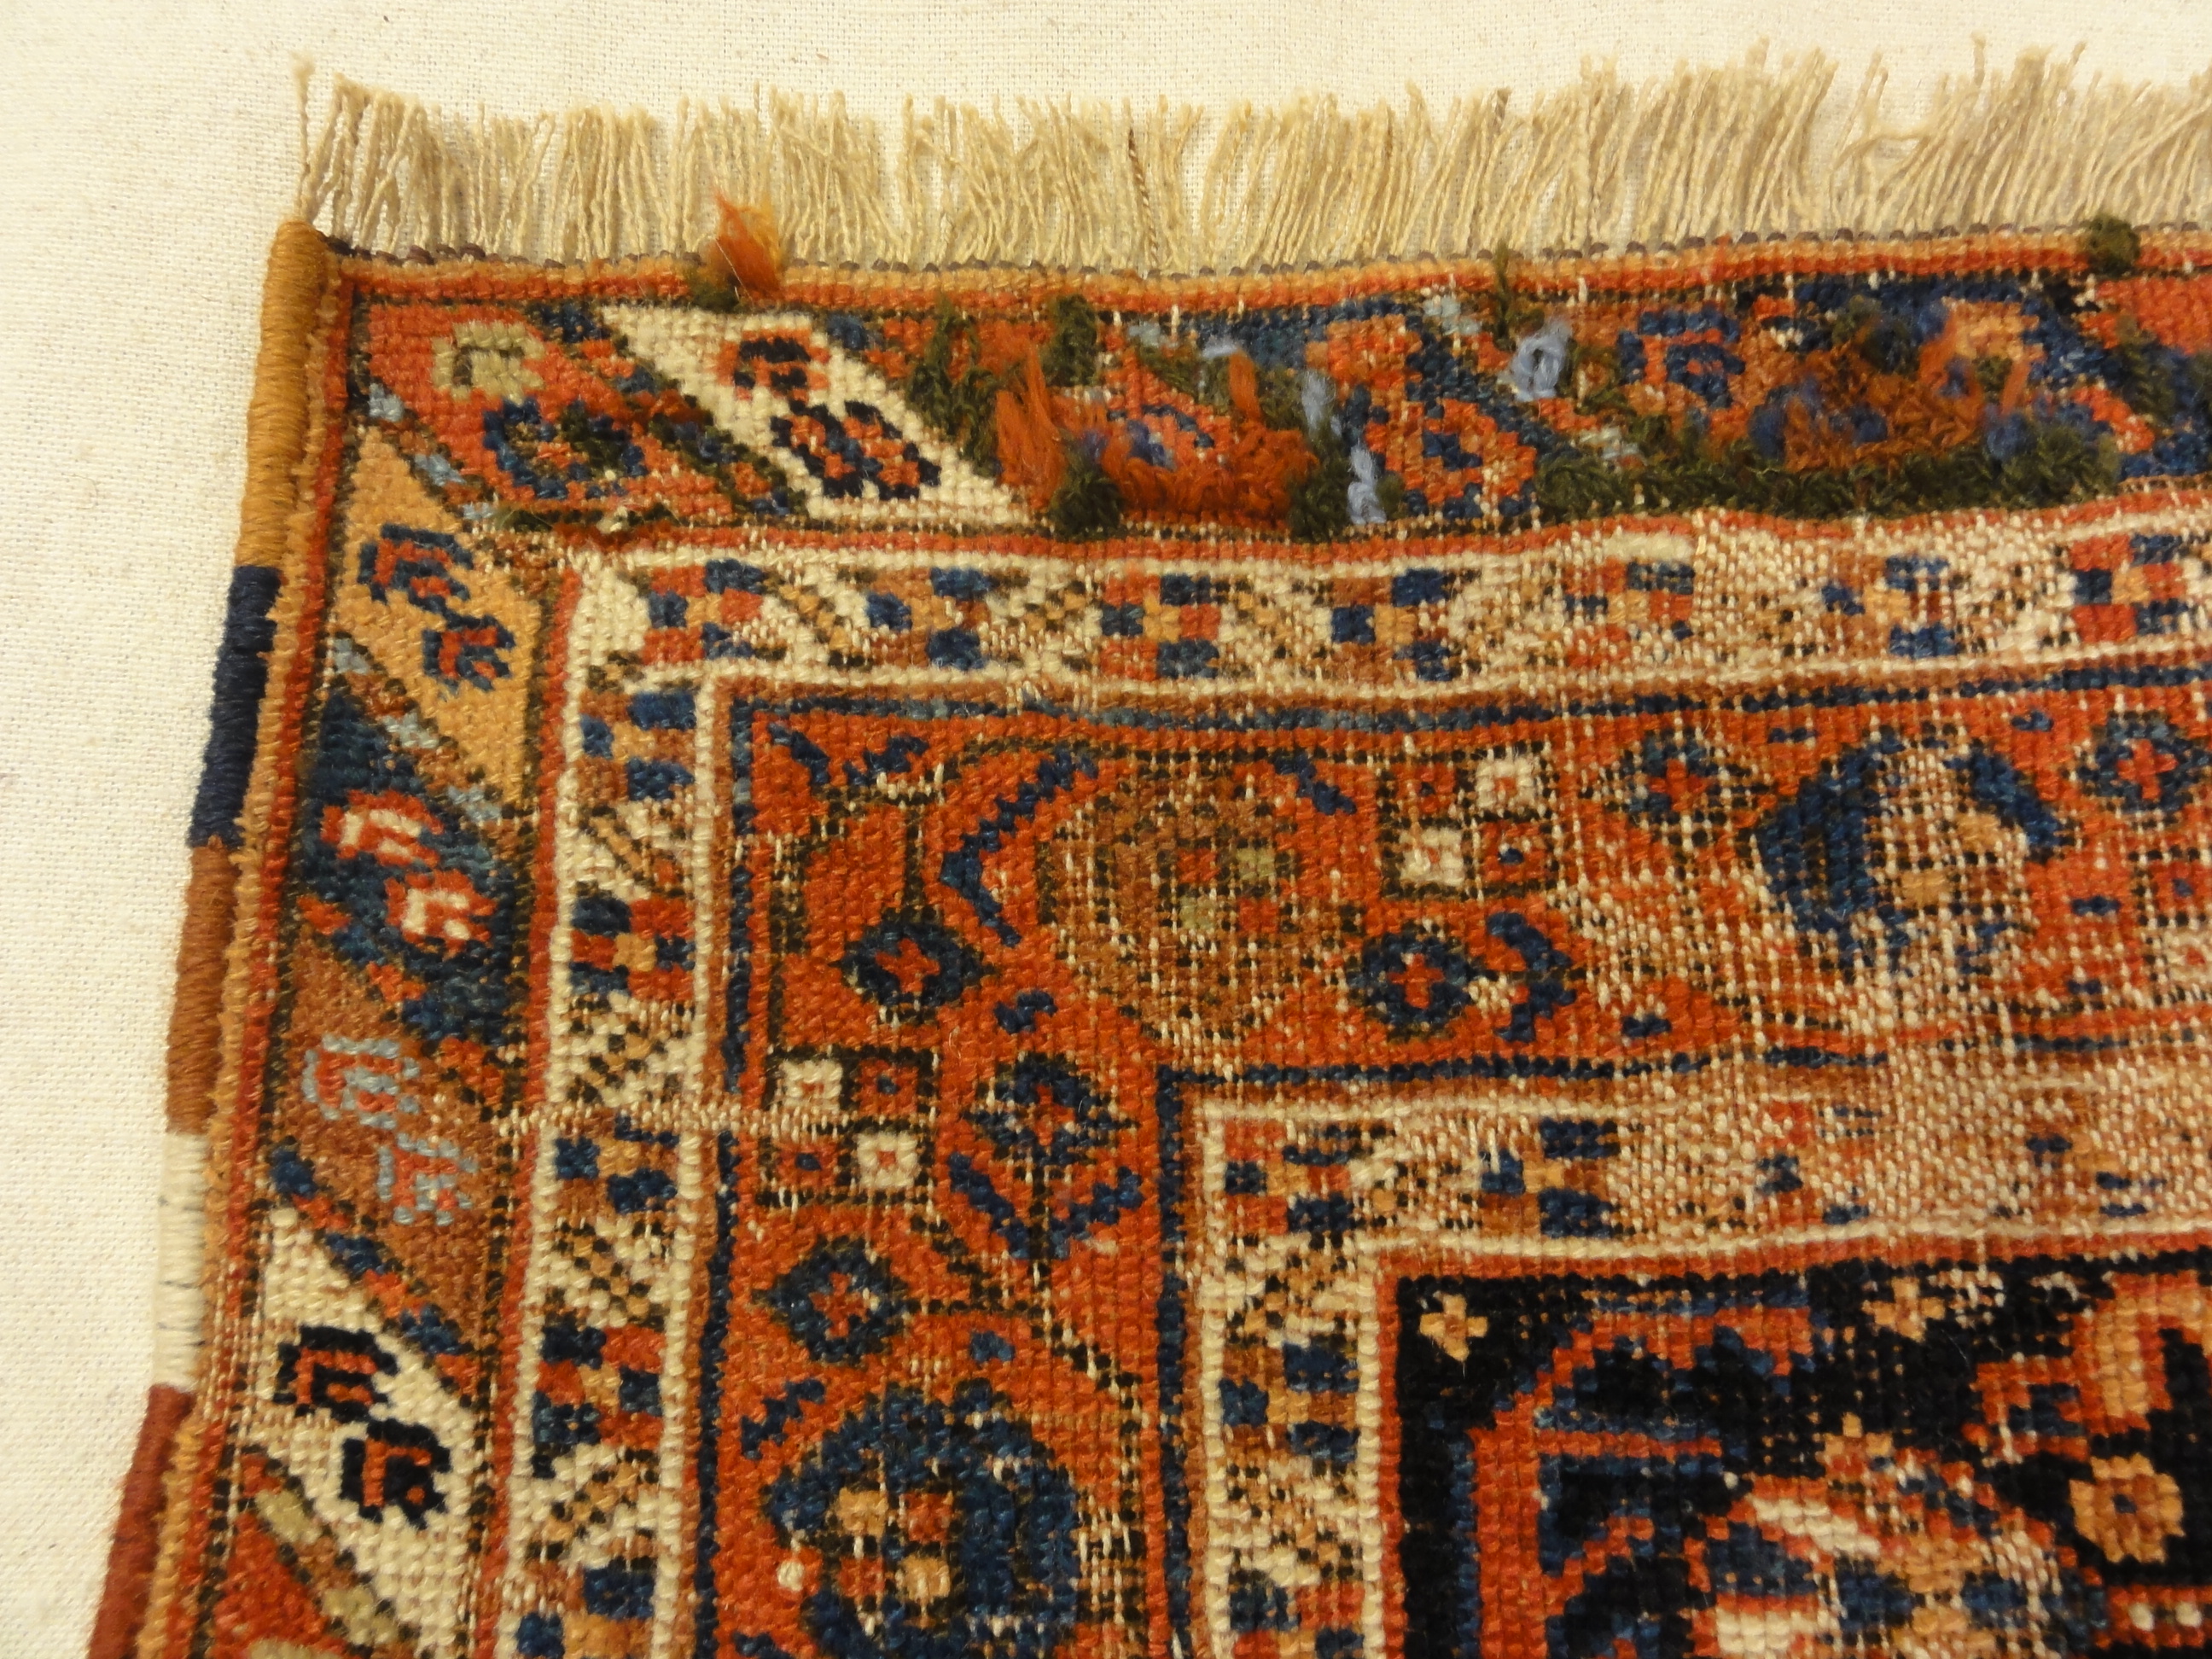 Antique Handwoven Persian Afshar Botteh. A piece of genuine, intricate woven carpet art sold by Santa Barbara Design Center Rugs and More.